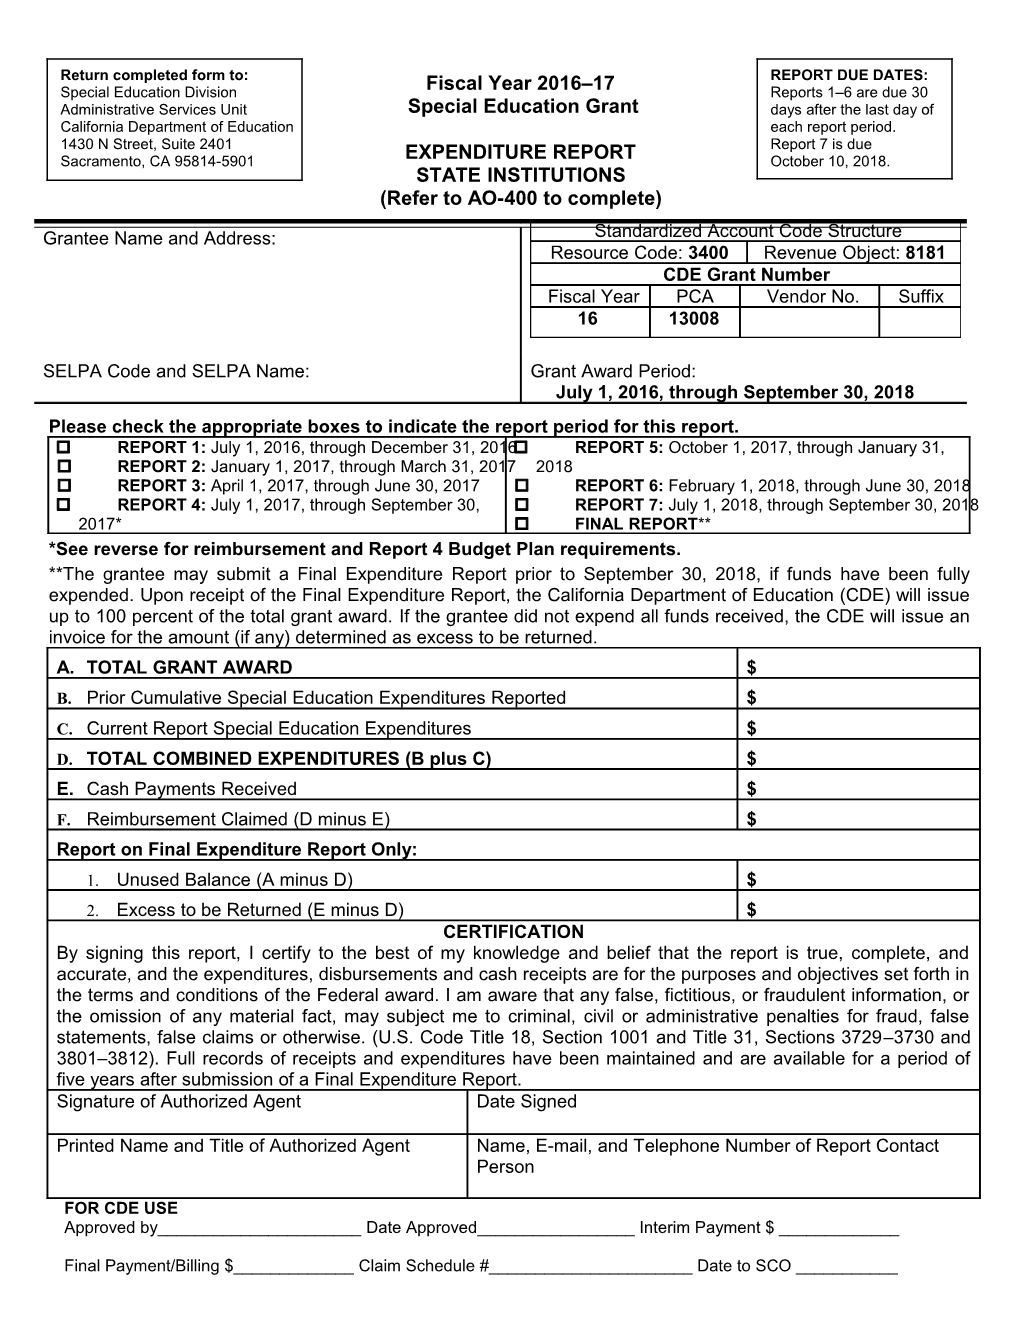 Form-16: Expenditure Report PCA 13008 - Administration & Support (CA Dept of Education)